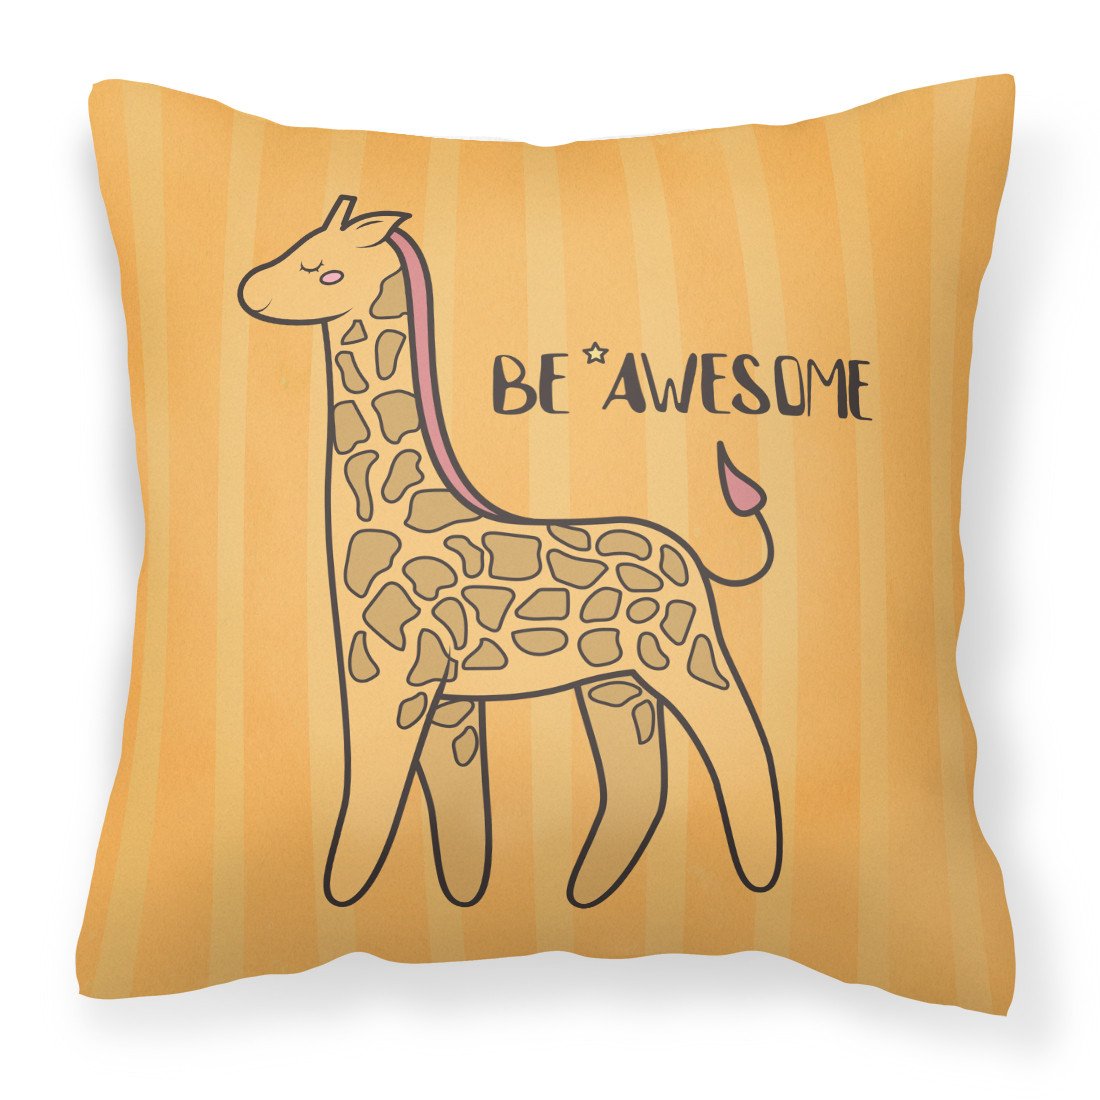 Nursery Be Awesome Griaffe Fabric Decorative Pillow BB7474PW1818 by Caroline's Treasures